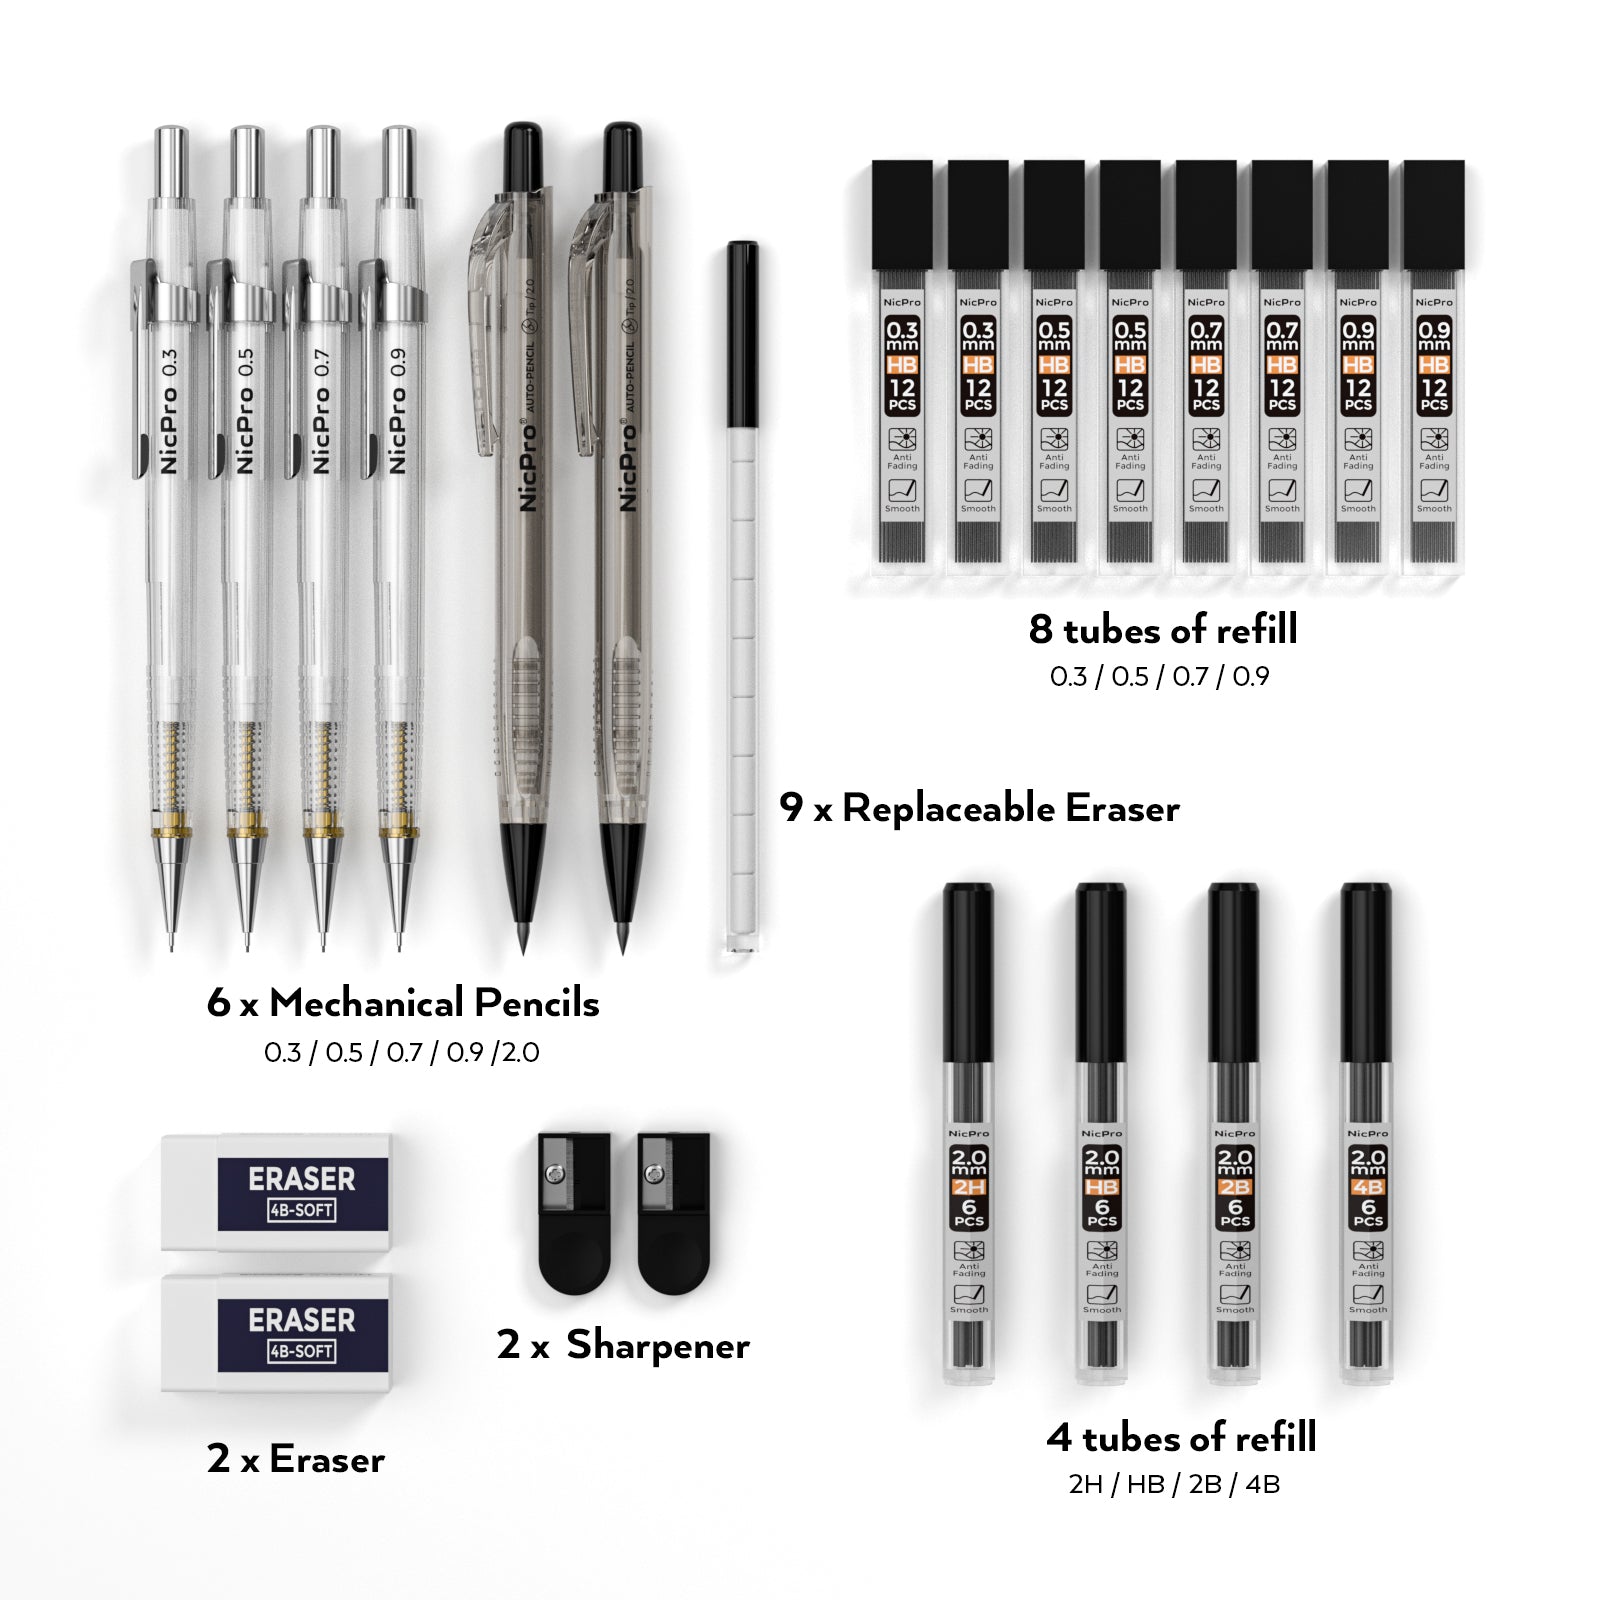 Mechanical pencils & leadholders for drawing, sketching and writing